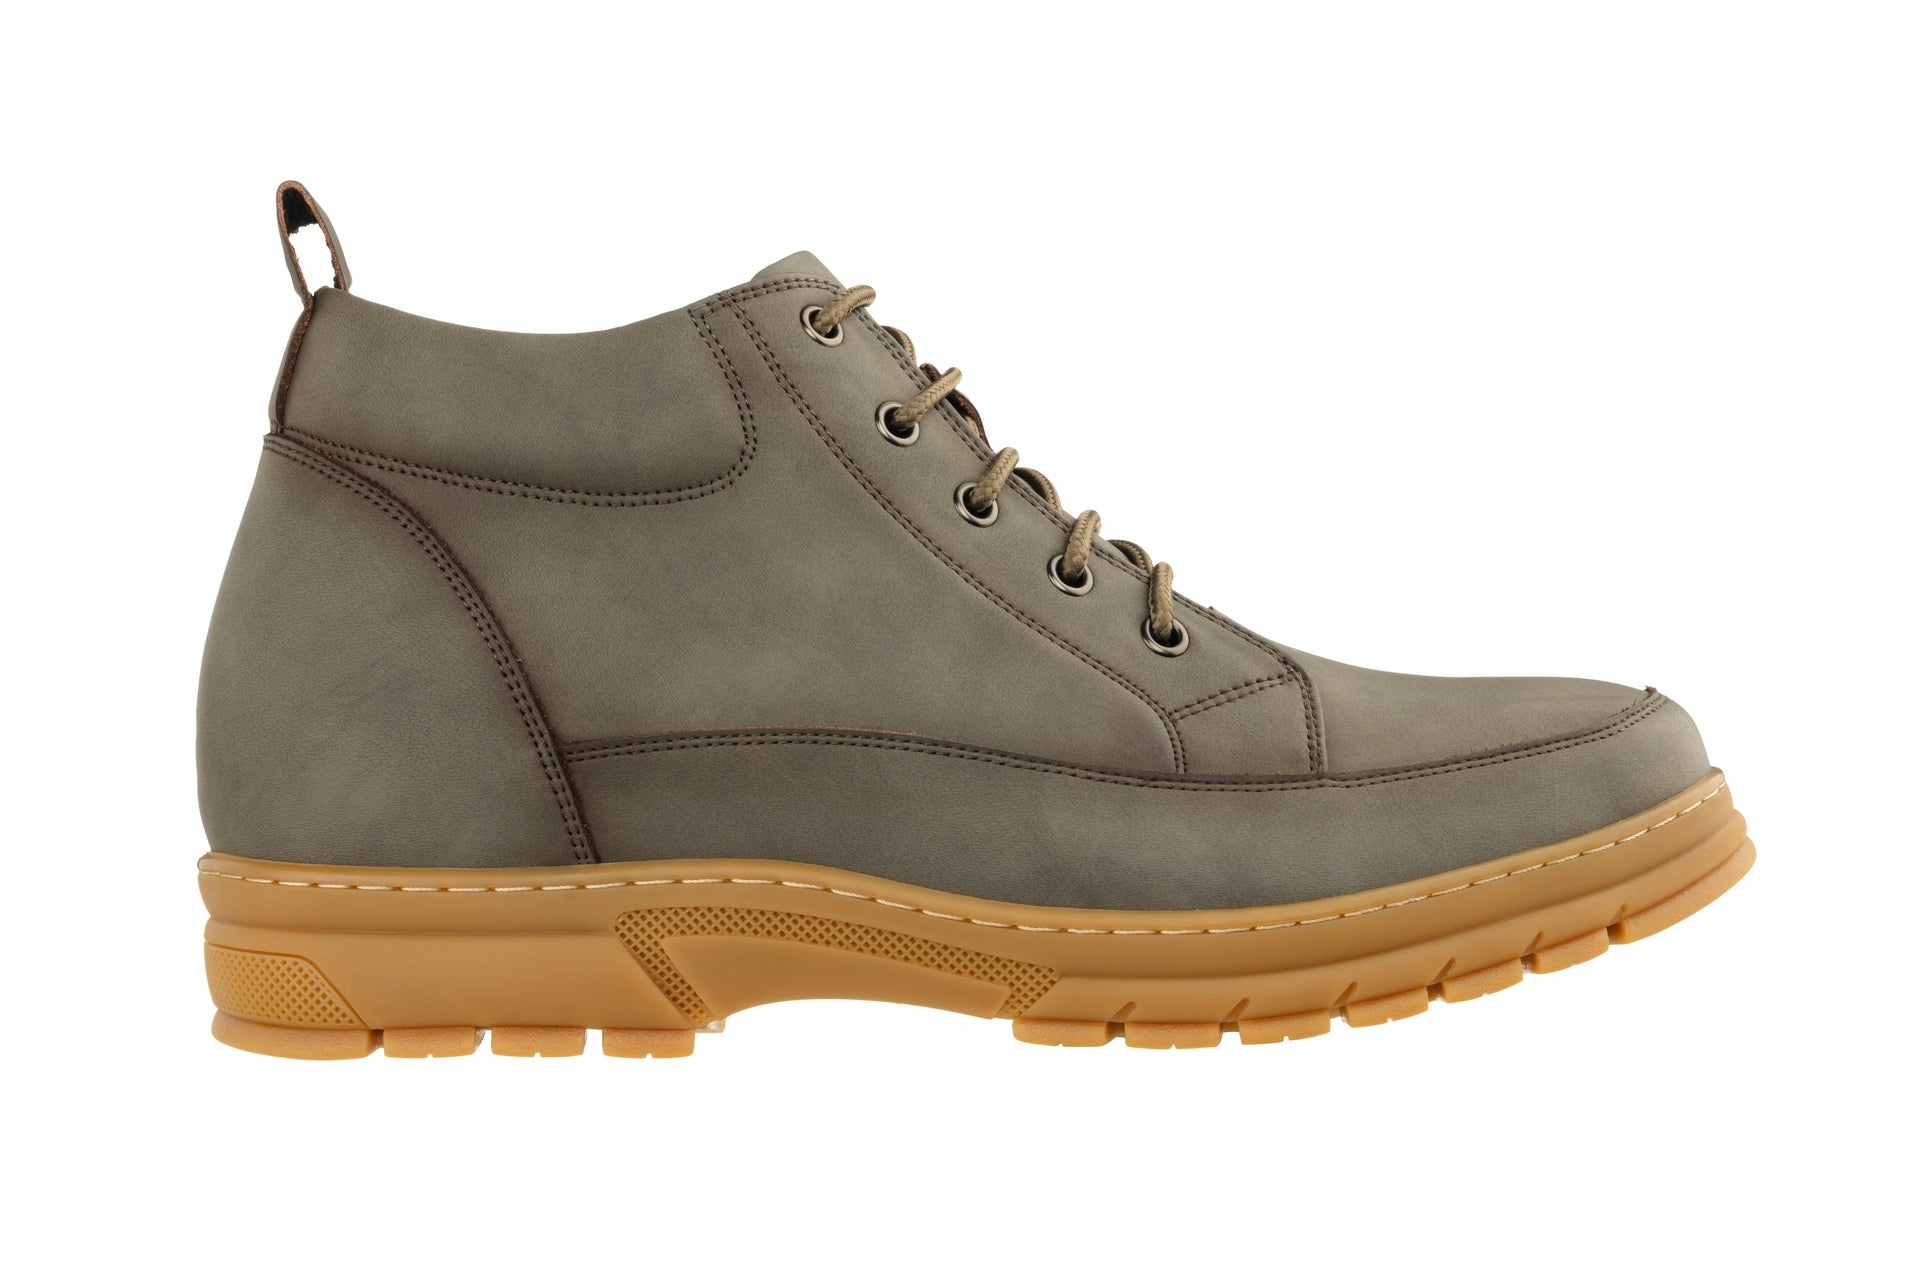 Elevator shoes height increase TOTO - K11551 - 2.8 Inches Taller (Grey) - Casual Hiker Boots